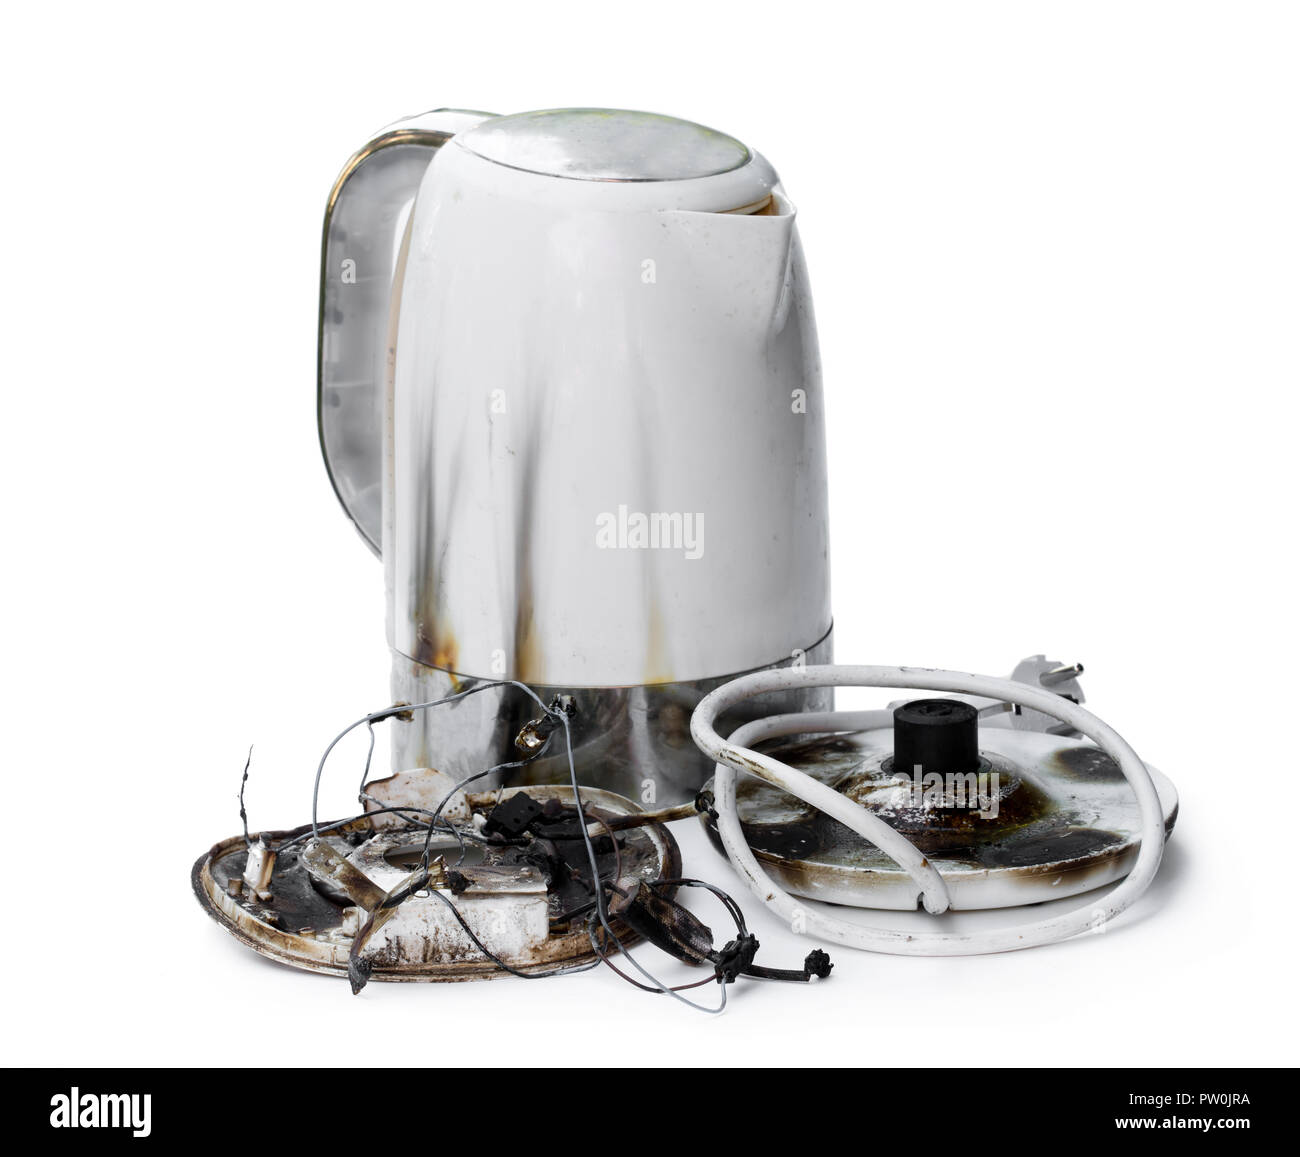 Faulty  automatic electric kettle caught fire Stock Photo